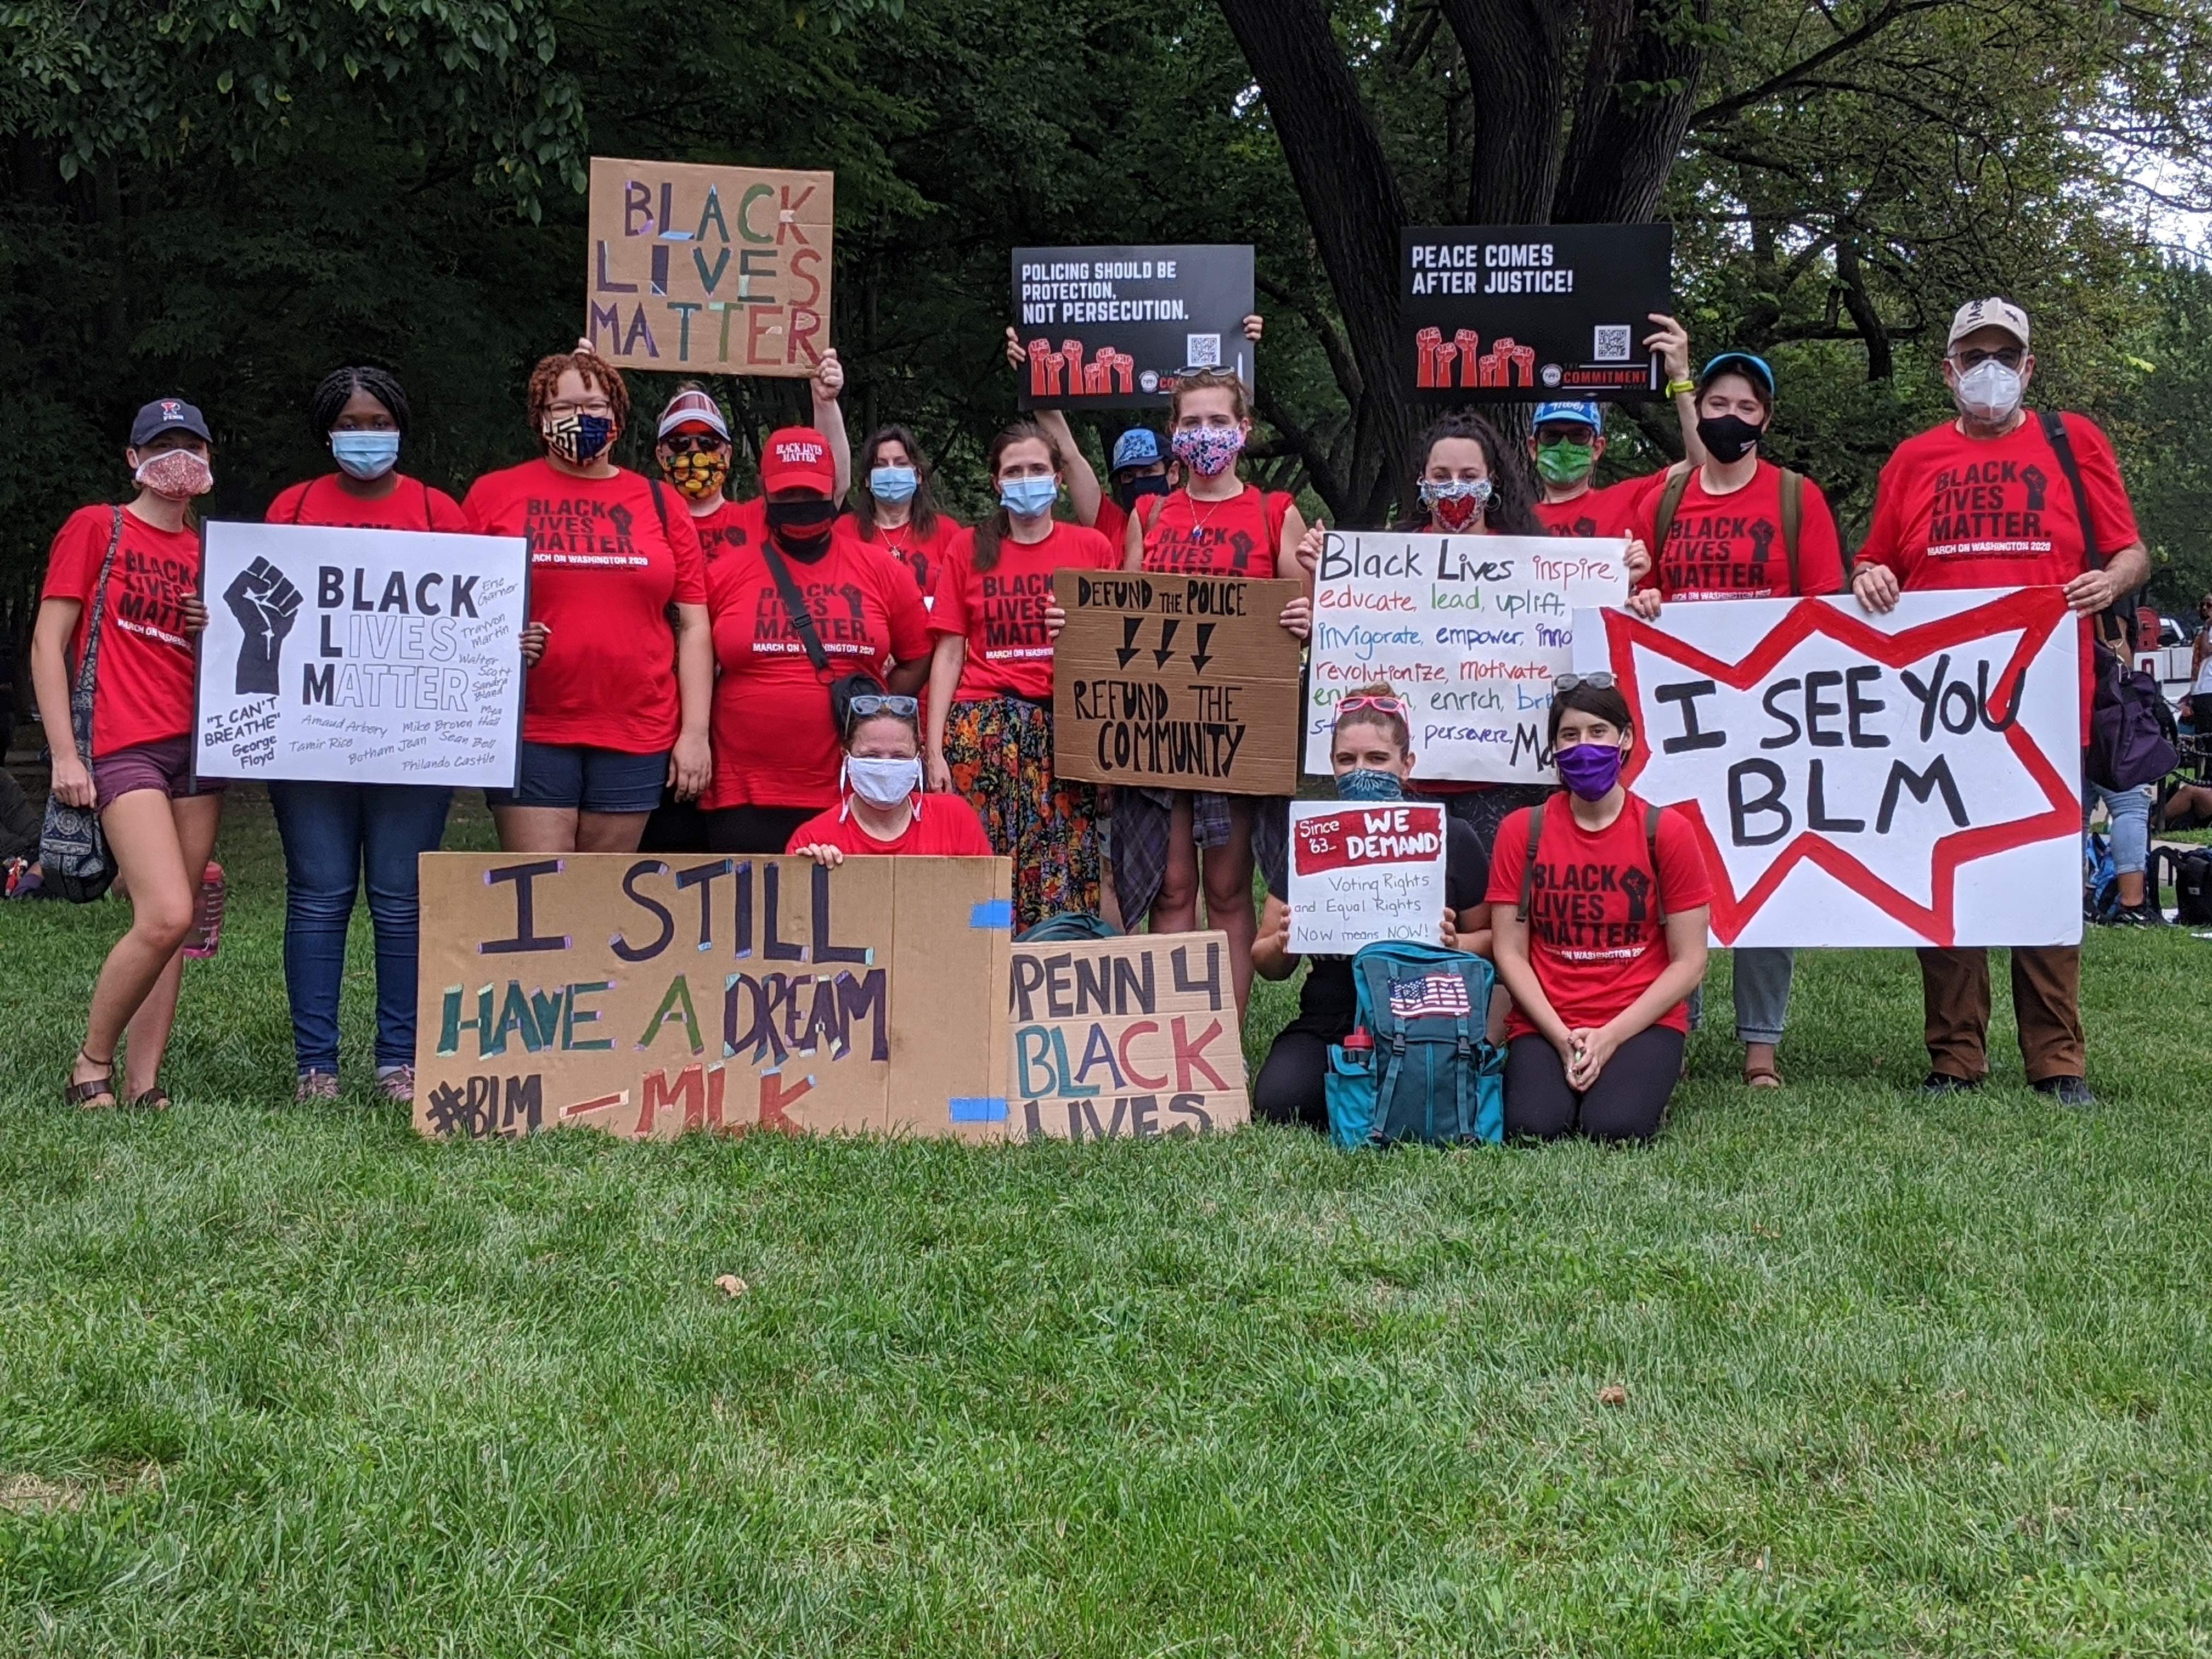 Students, faculty, and staff pose with Black Lives Matter signs while sitting and standing in the grass in Washington, D.C.